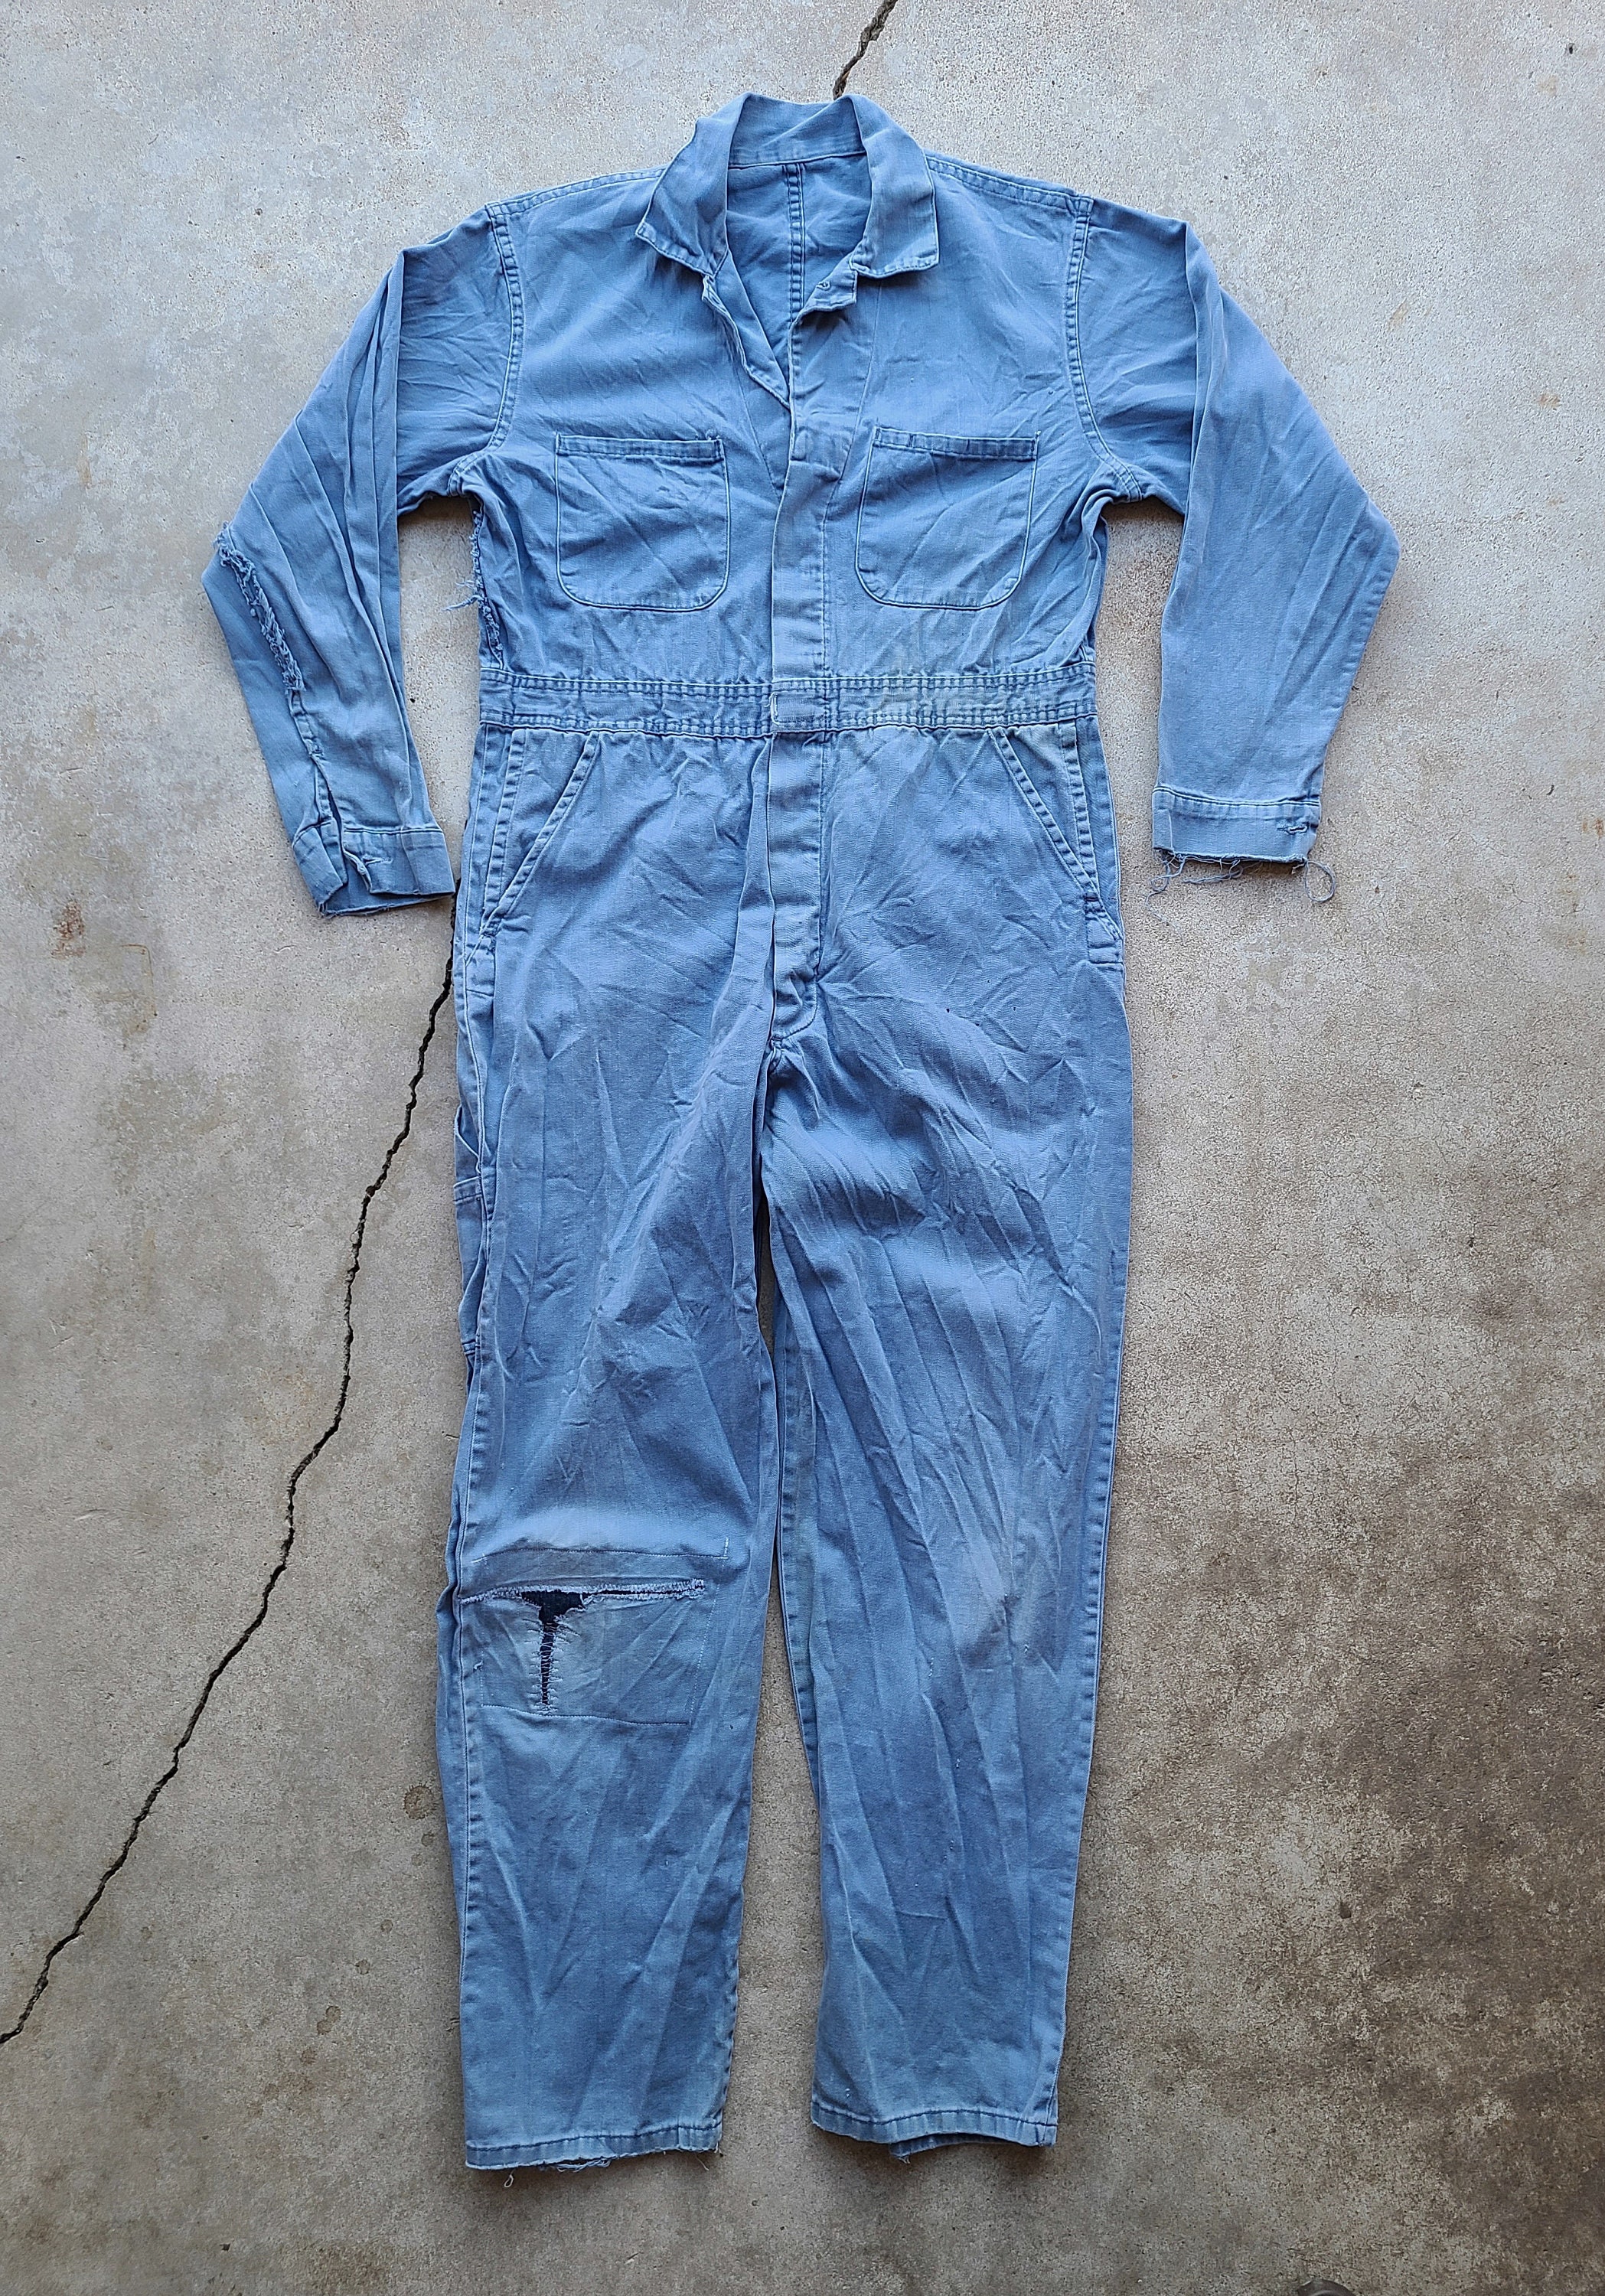 Blue Coveralls - Etsy